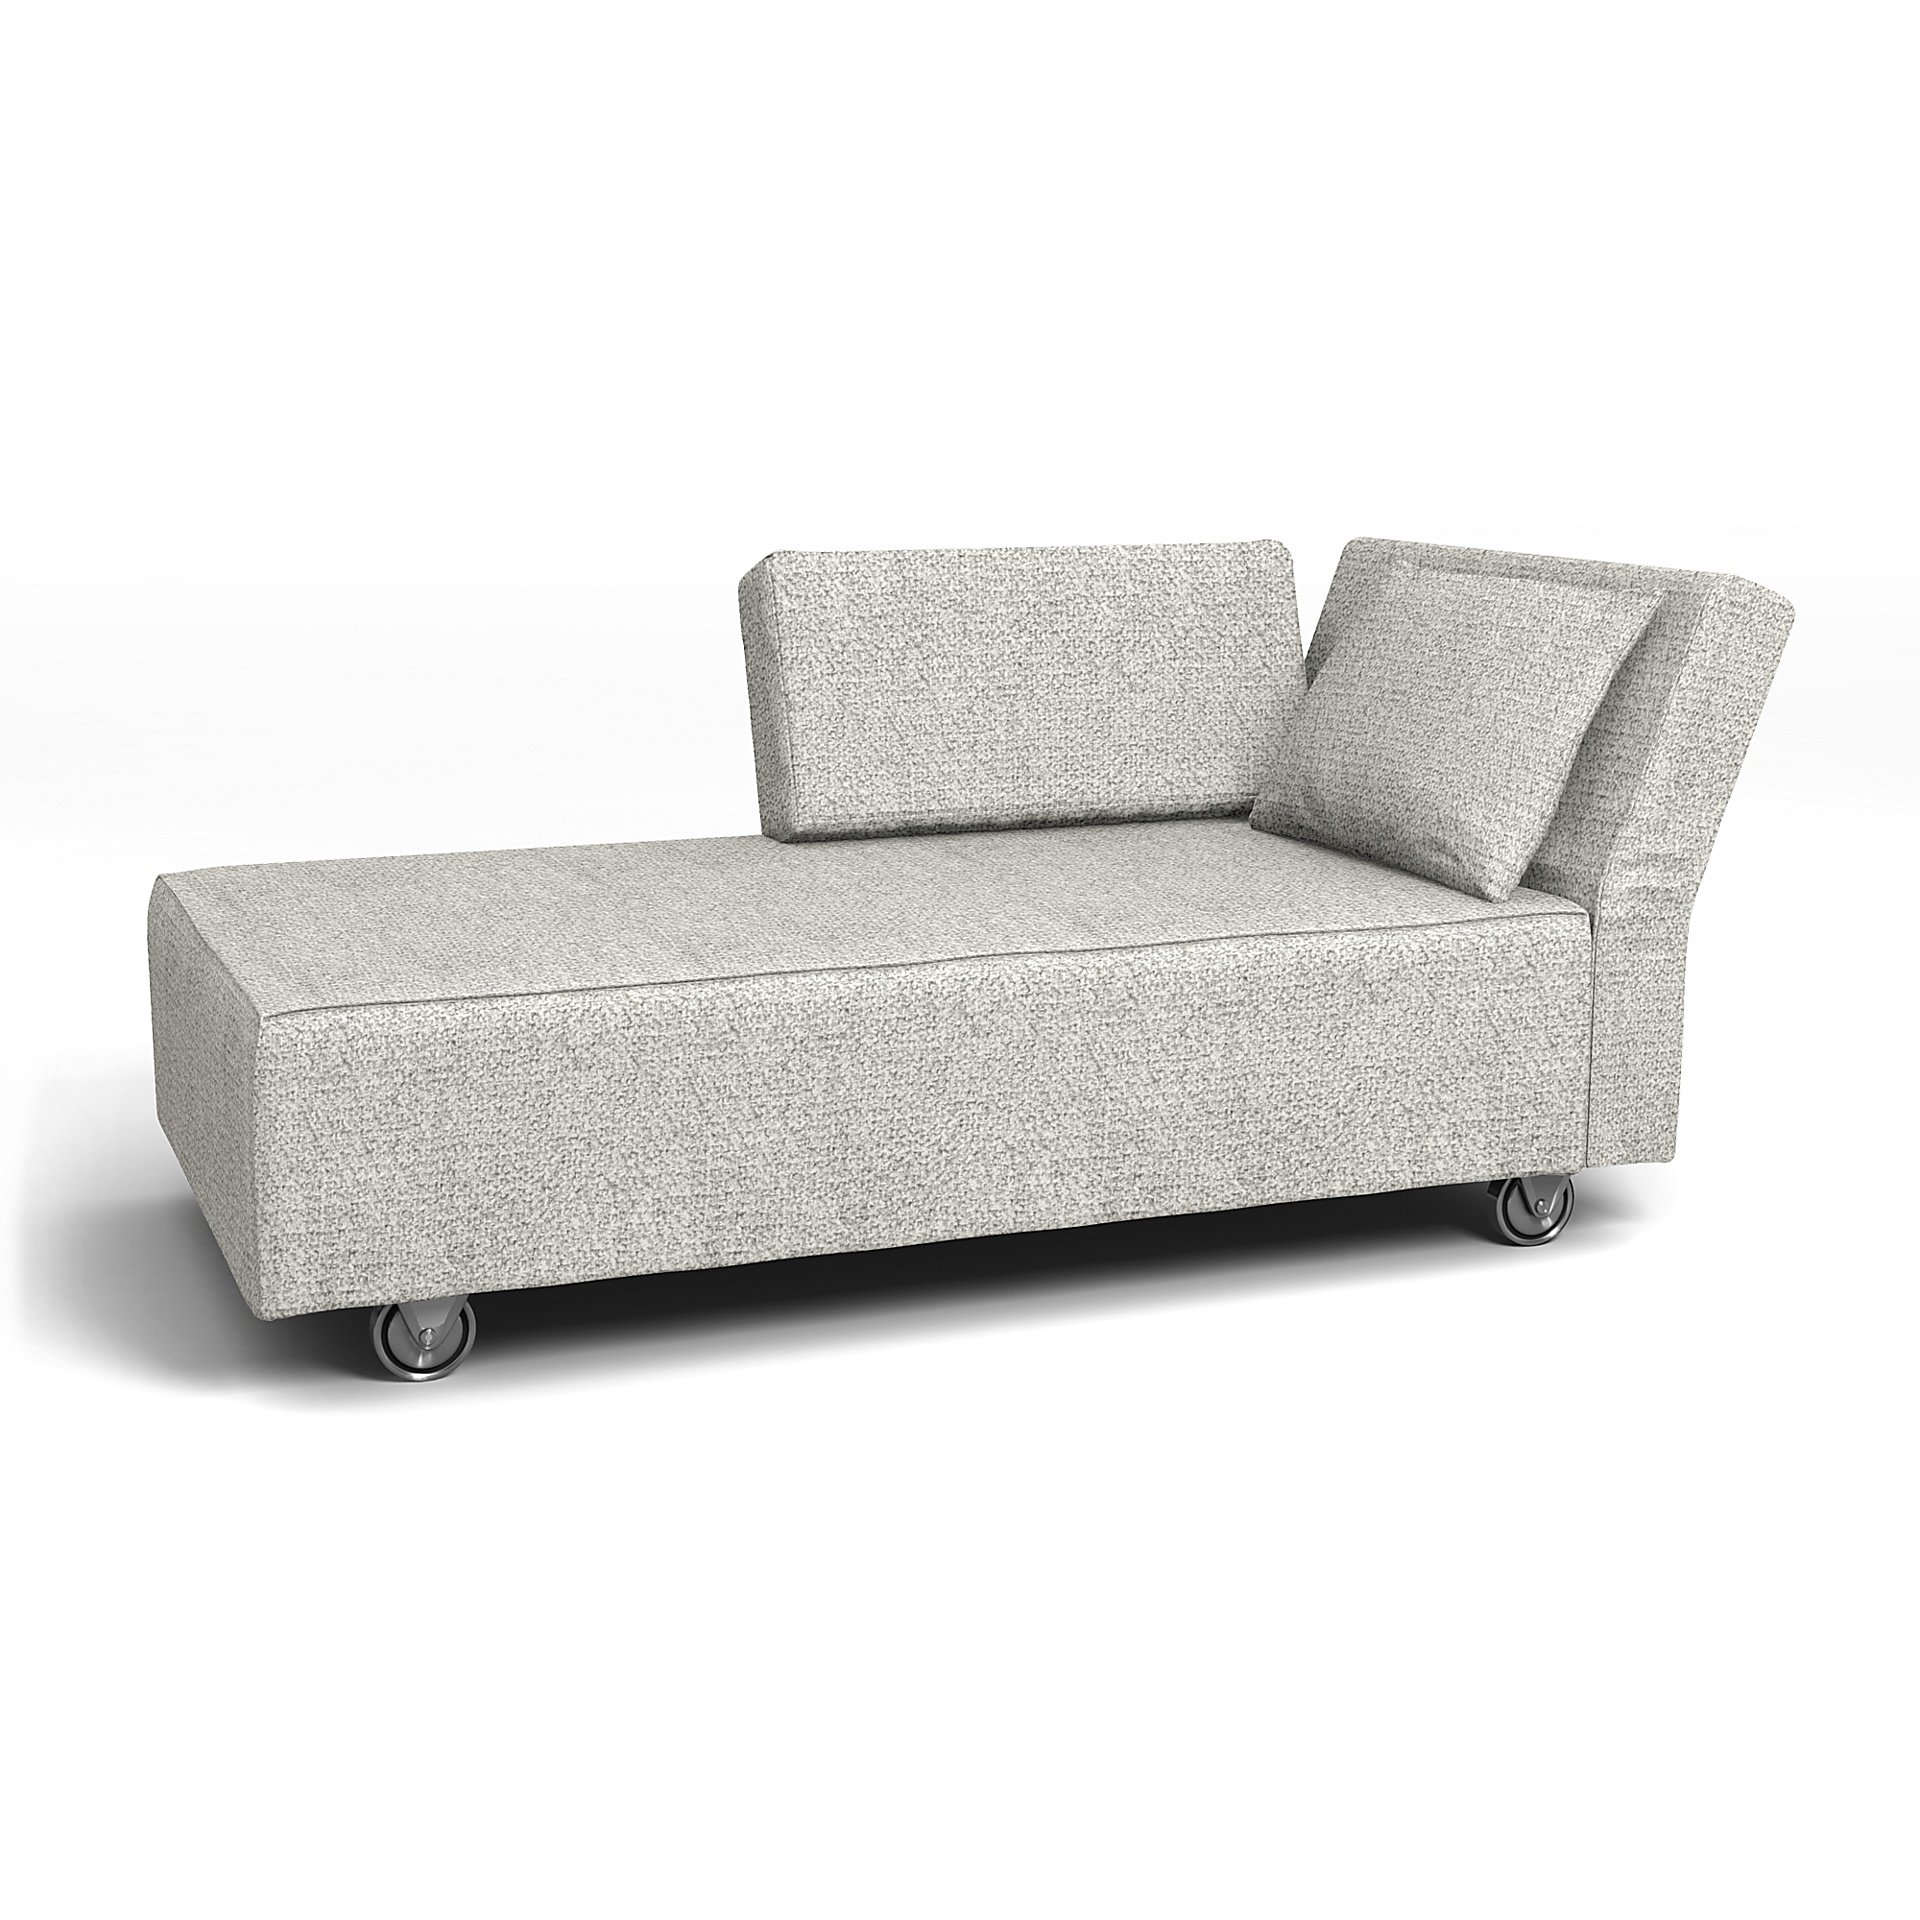 IKEA - Falsterbo Chaise with Right Armrest Cover, Driftwood, Boucle & Texture - Bemz